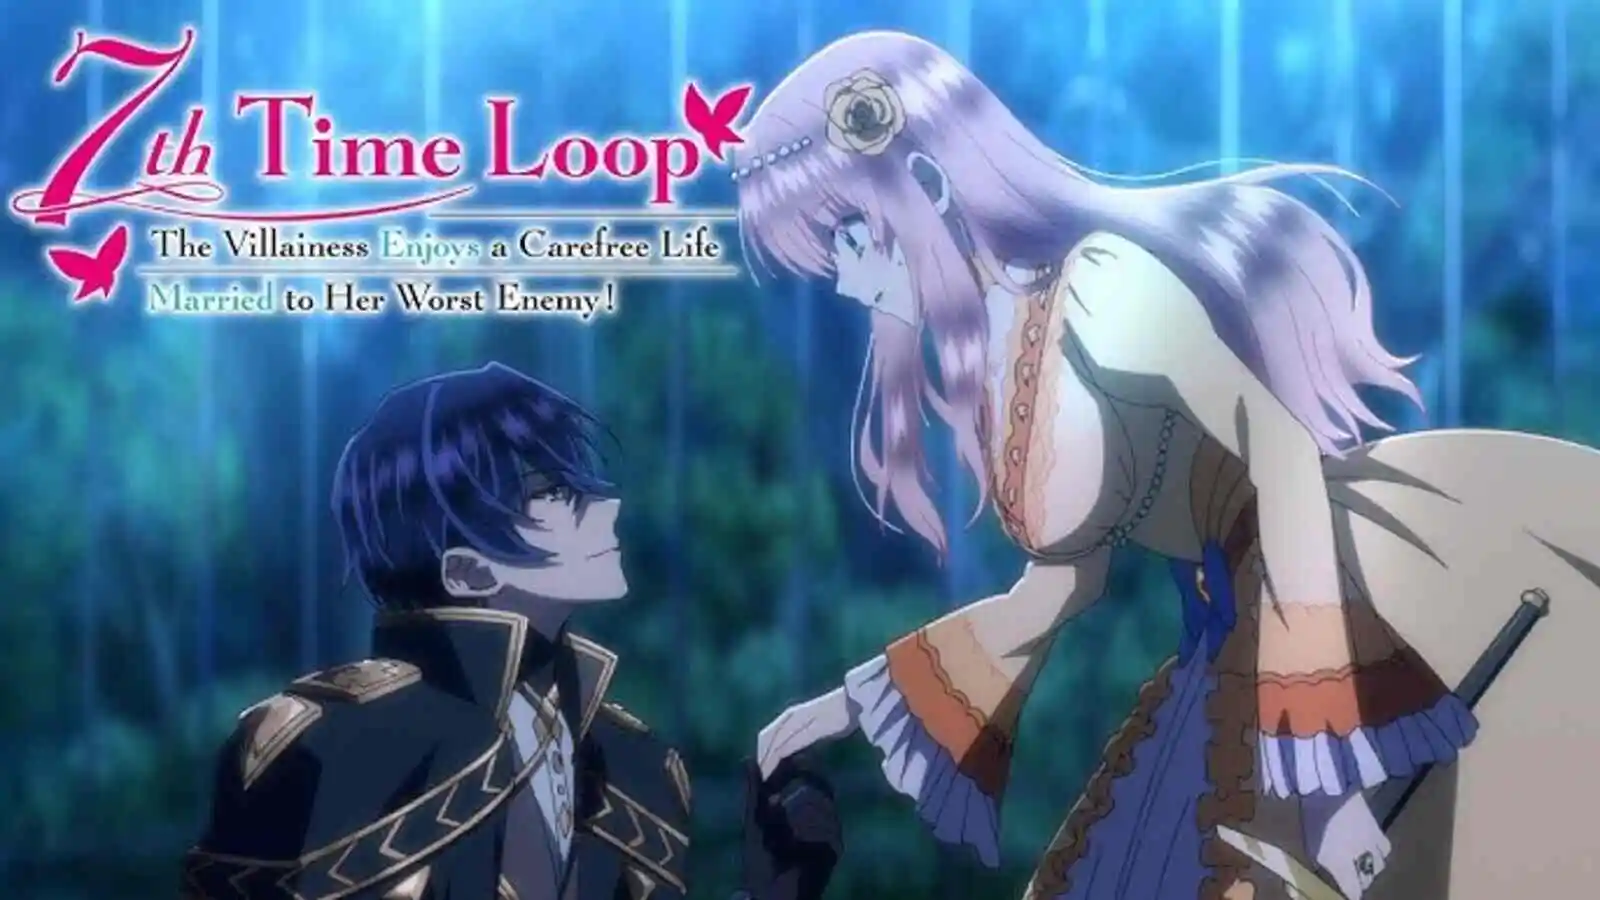 7th Time Loop Episode 1 Recap, Summary and Explained